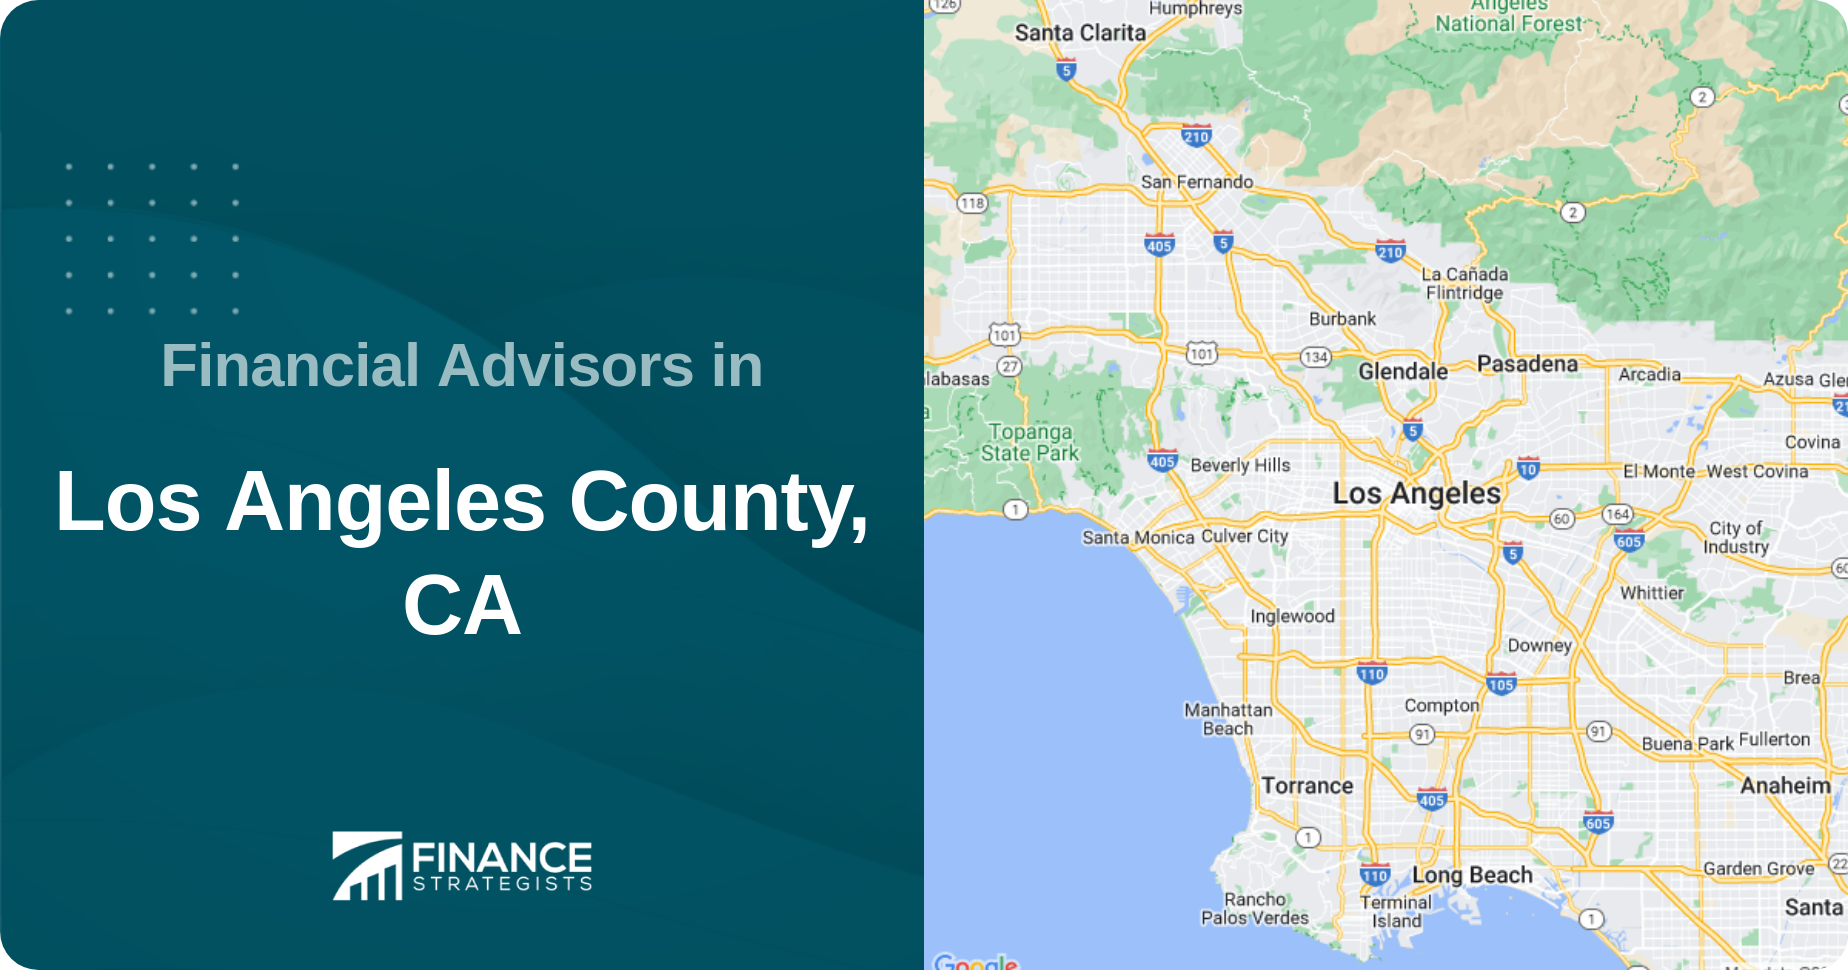 Financial Advisors in Los Angeles County, CA